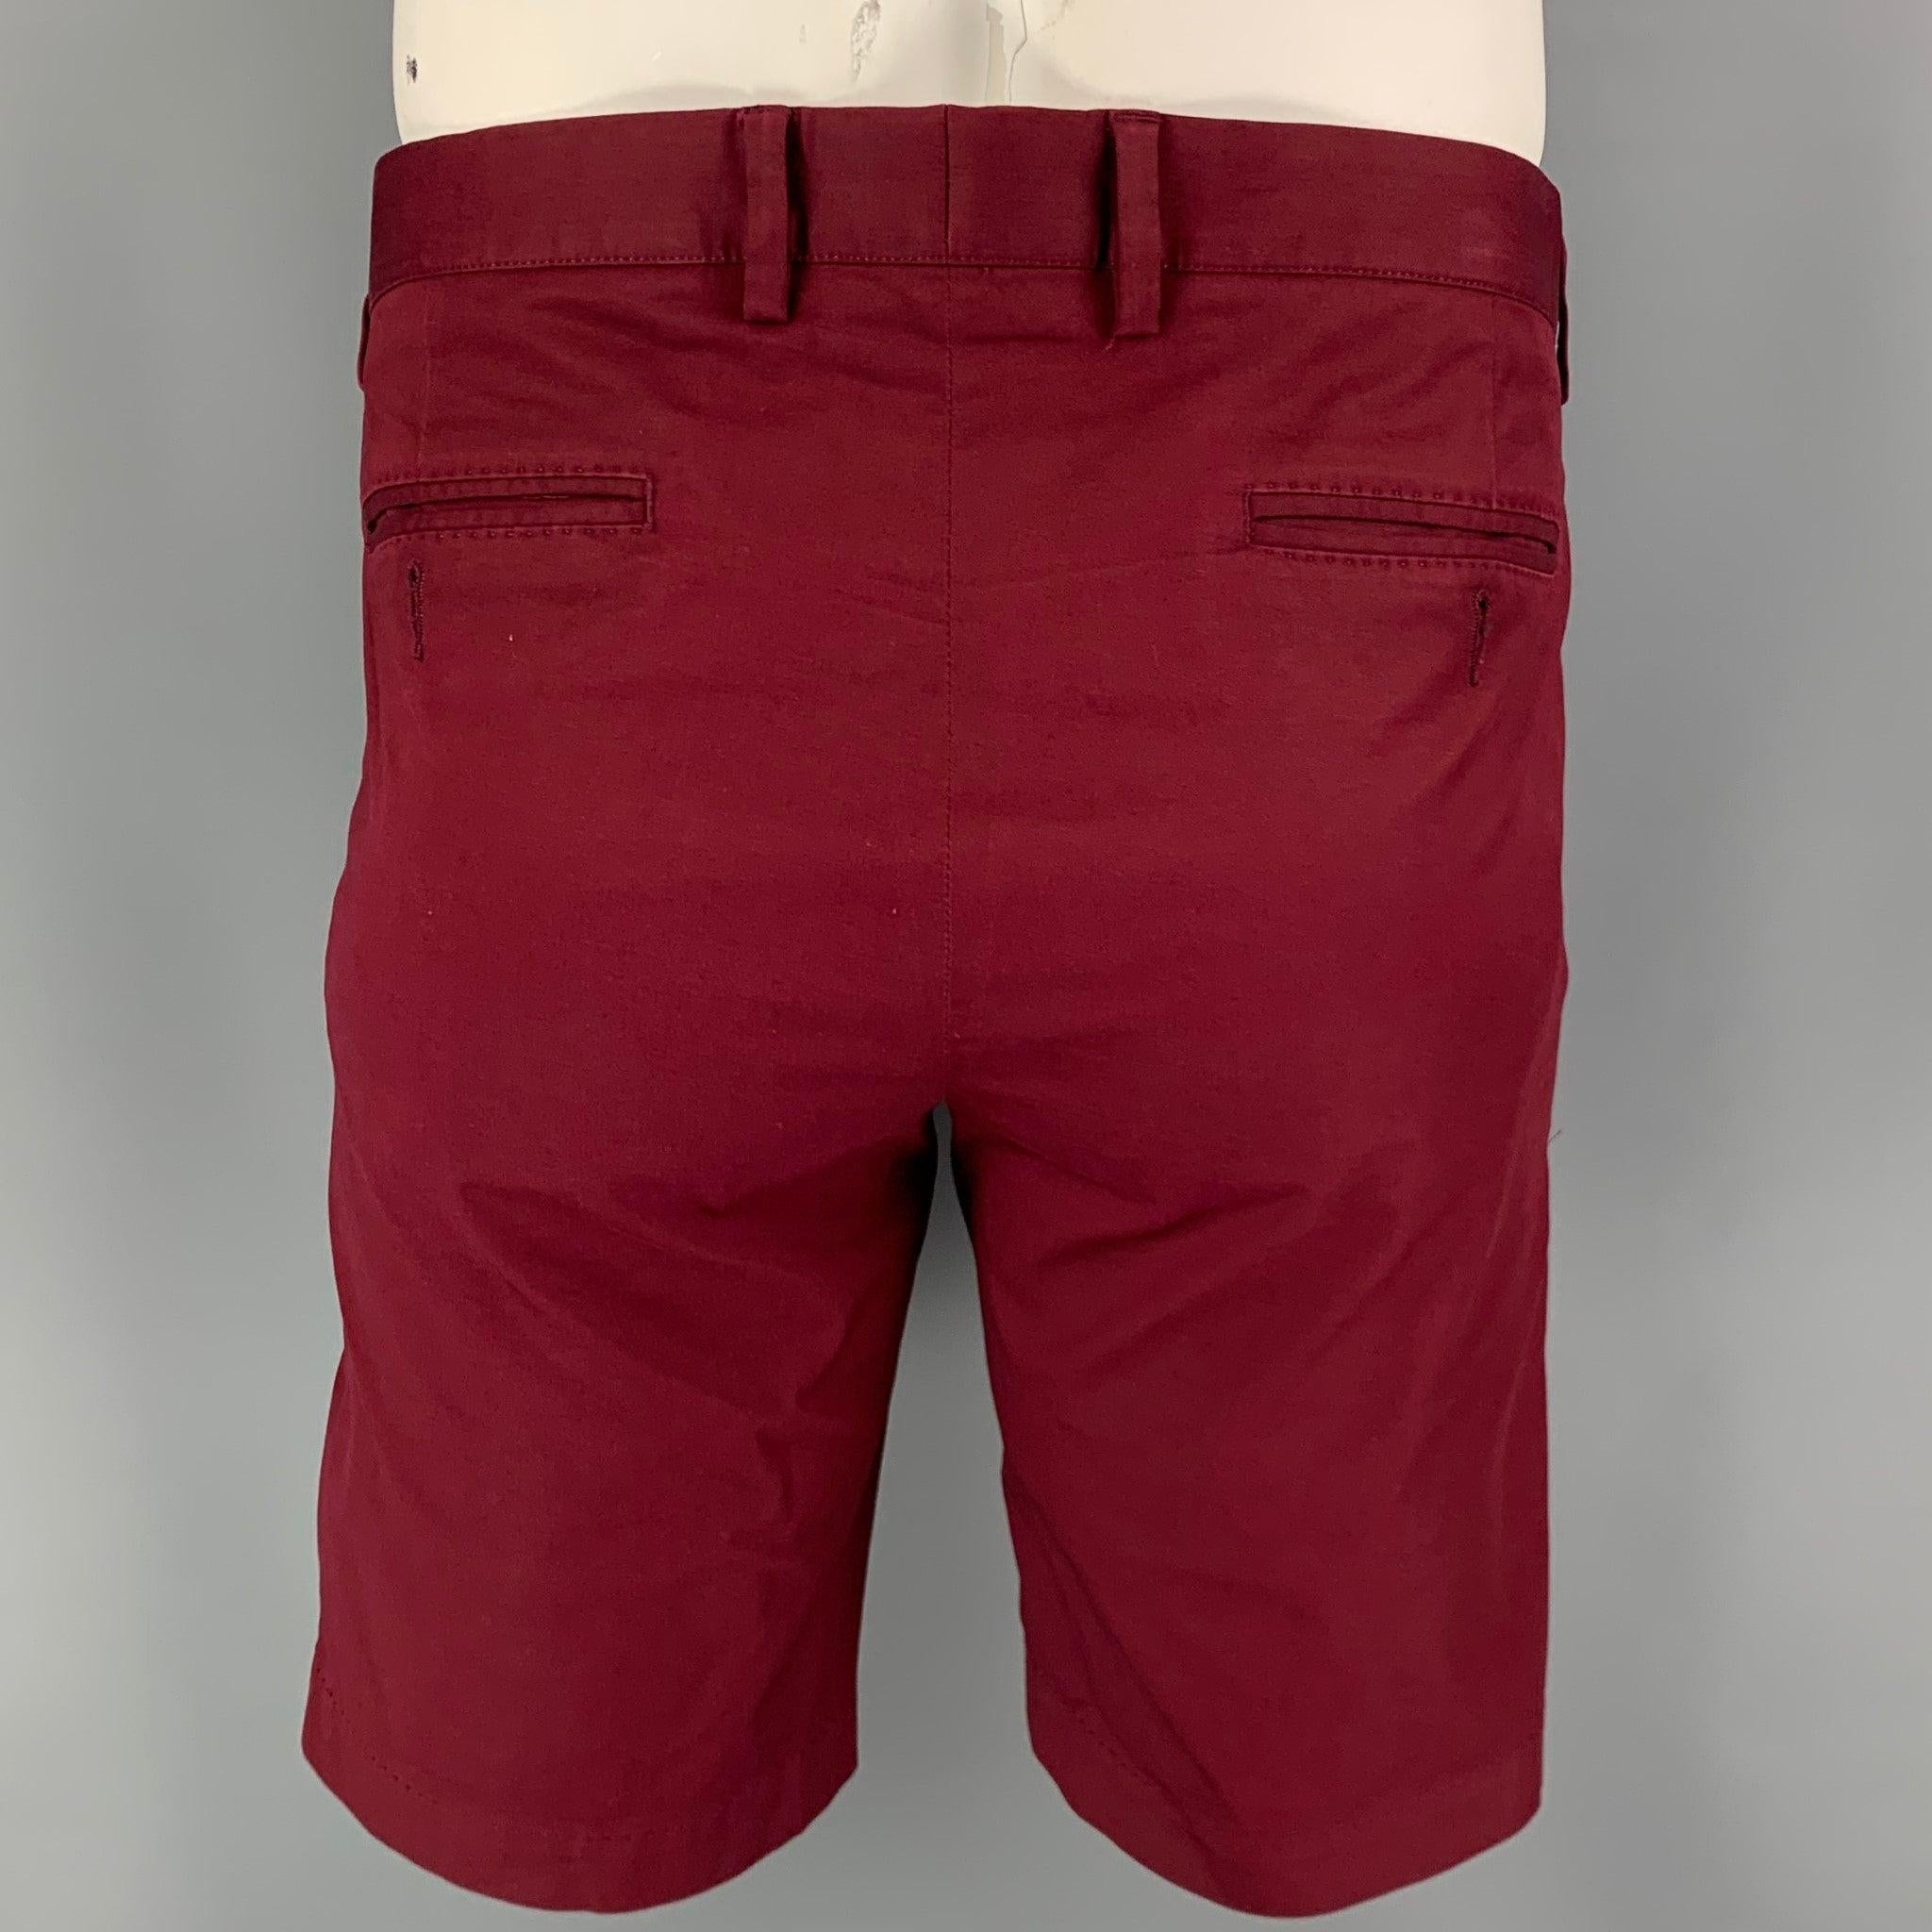 DOLCE & GABBANA shorts comes in a burgundy cotton featuring a chino style and a zip fly closure. Made in Italy.
Excellent
Pre-Owned Condition. 

Marked:   52 

Measurements: 
  Waist: 36 inches Rise: 9 inches Inseam: 10 inches Leg Opening: 20 inches